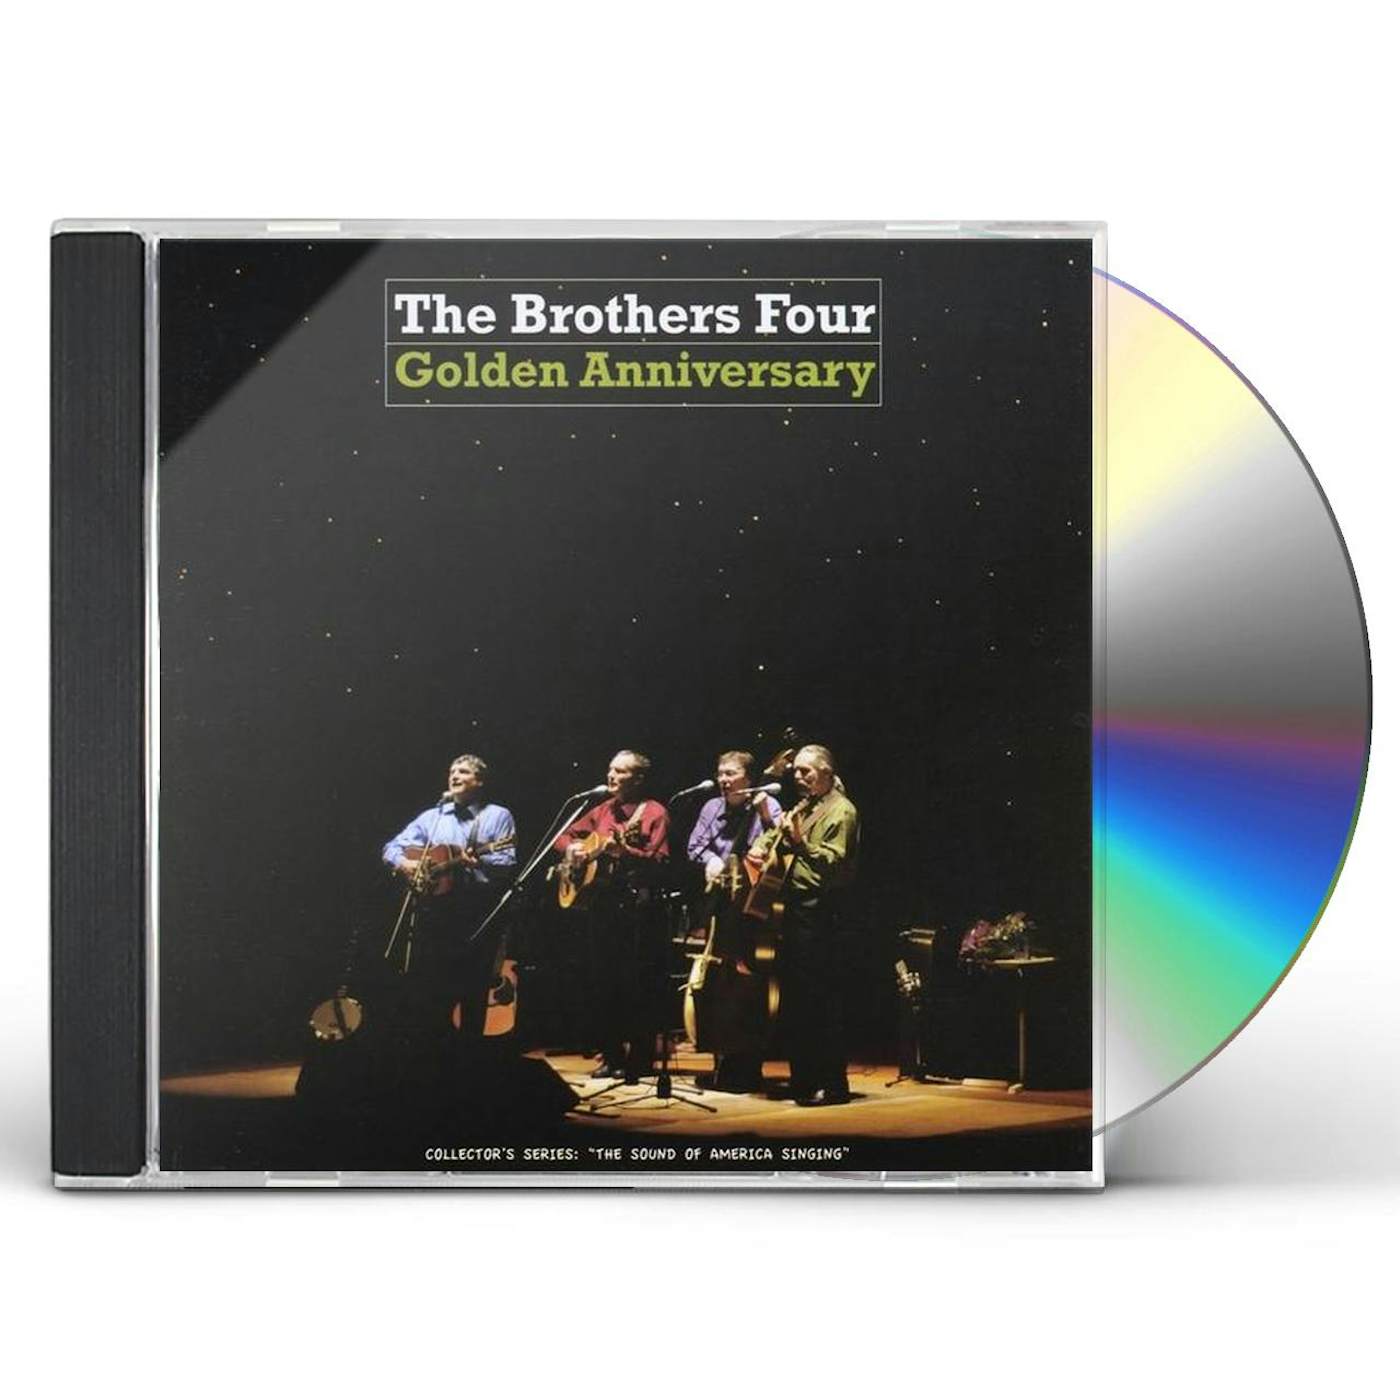 The Brothers Four GOLDEN ANNIVERSARY CD